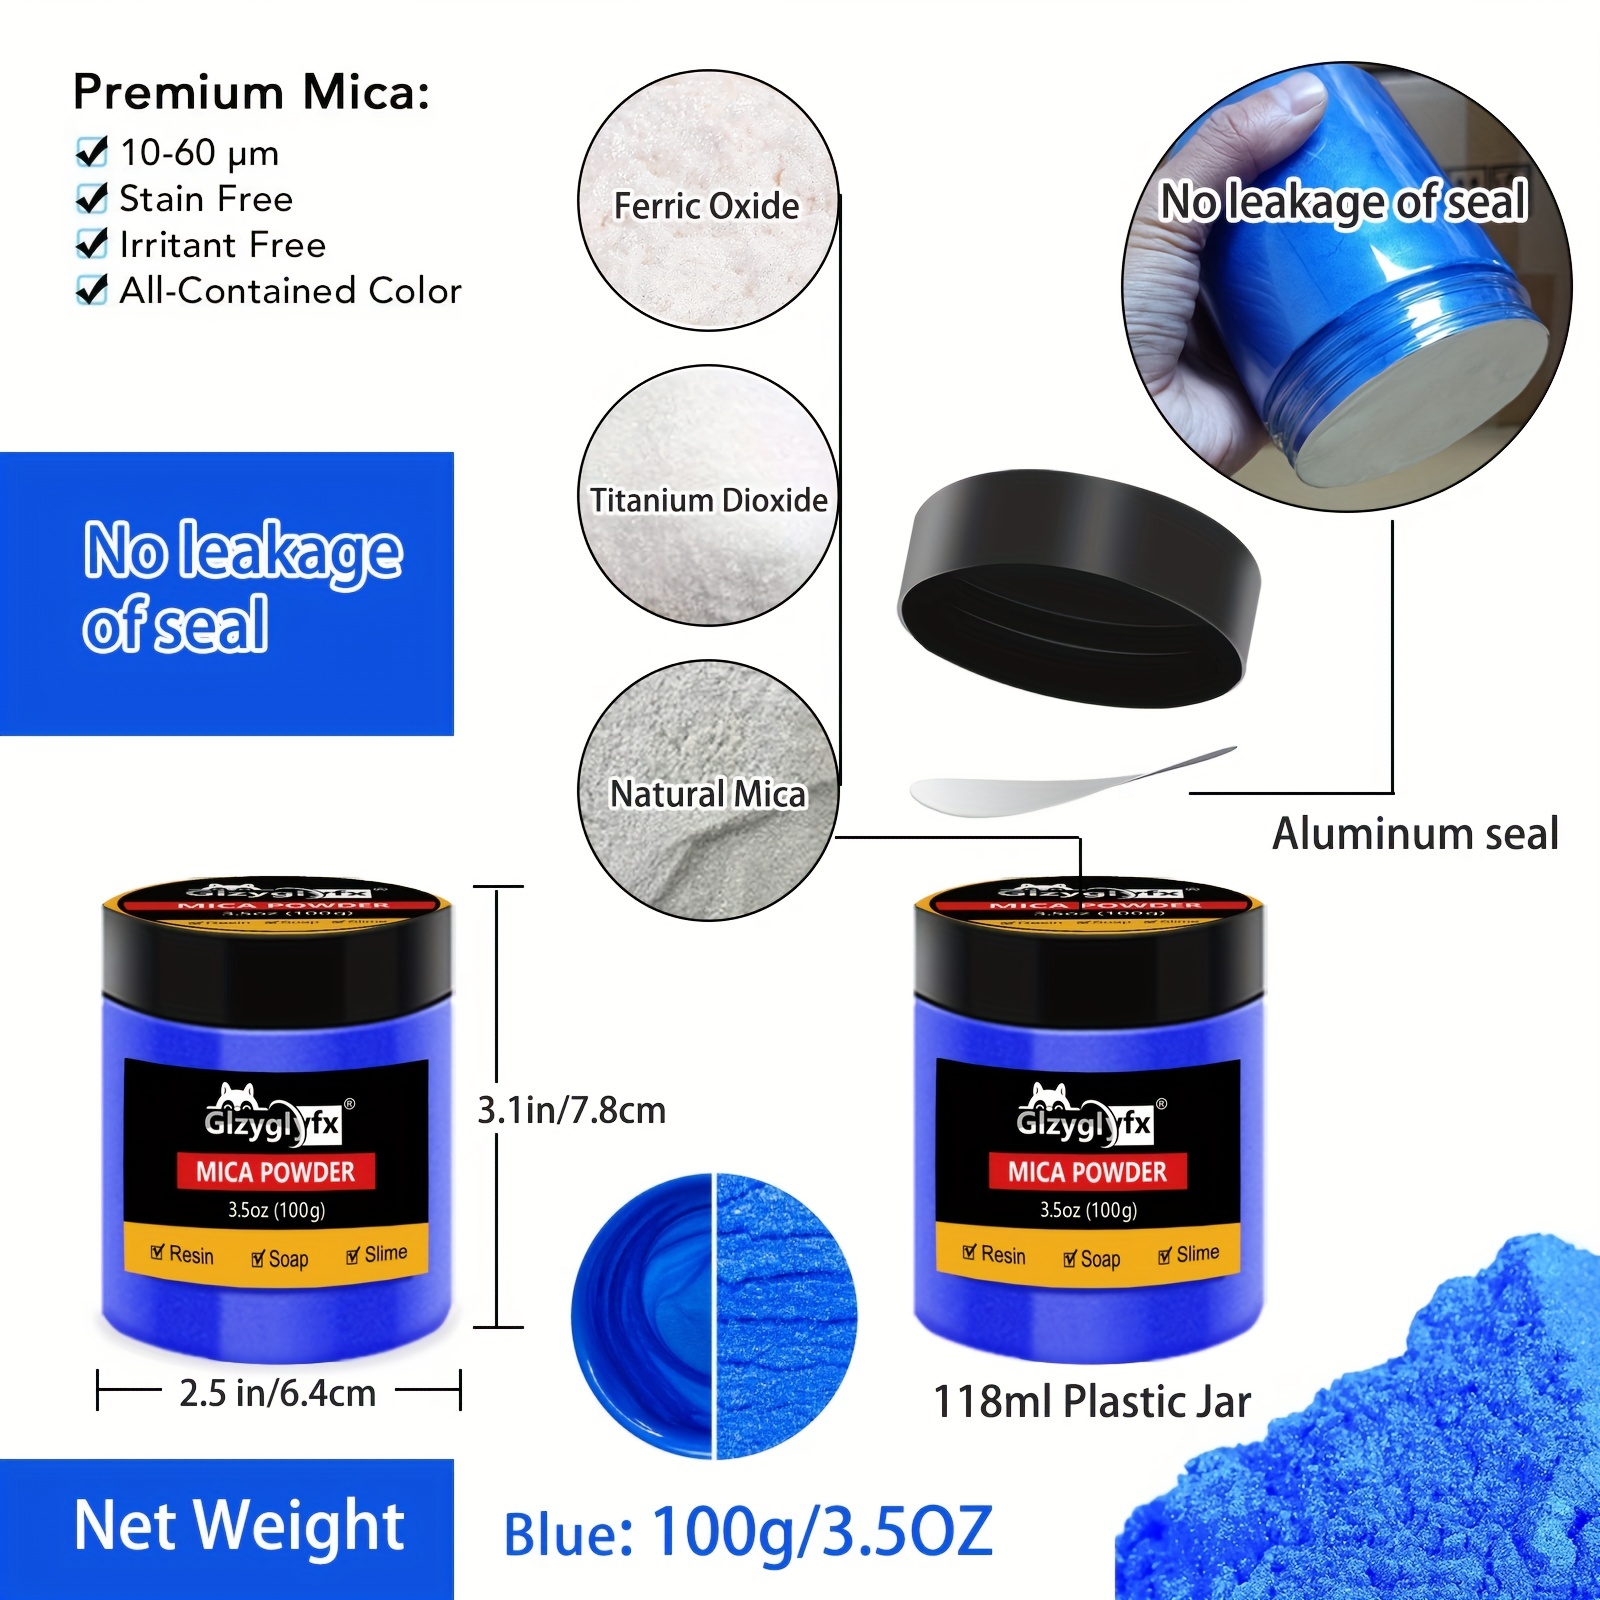 60 Colors Mica Powder-Natural Cosmetic Grade Pigment Powder for Epoxy Resin,Soap Making,Bath Bombs,Candle,Lip Gloss,Slime,DIY Crafts,Paints,Jewelry An